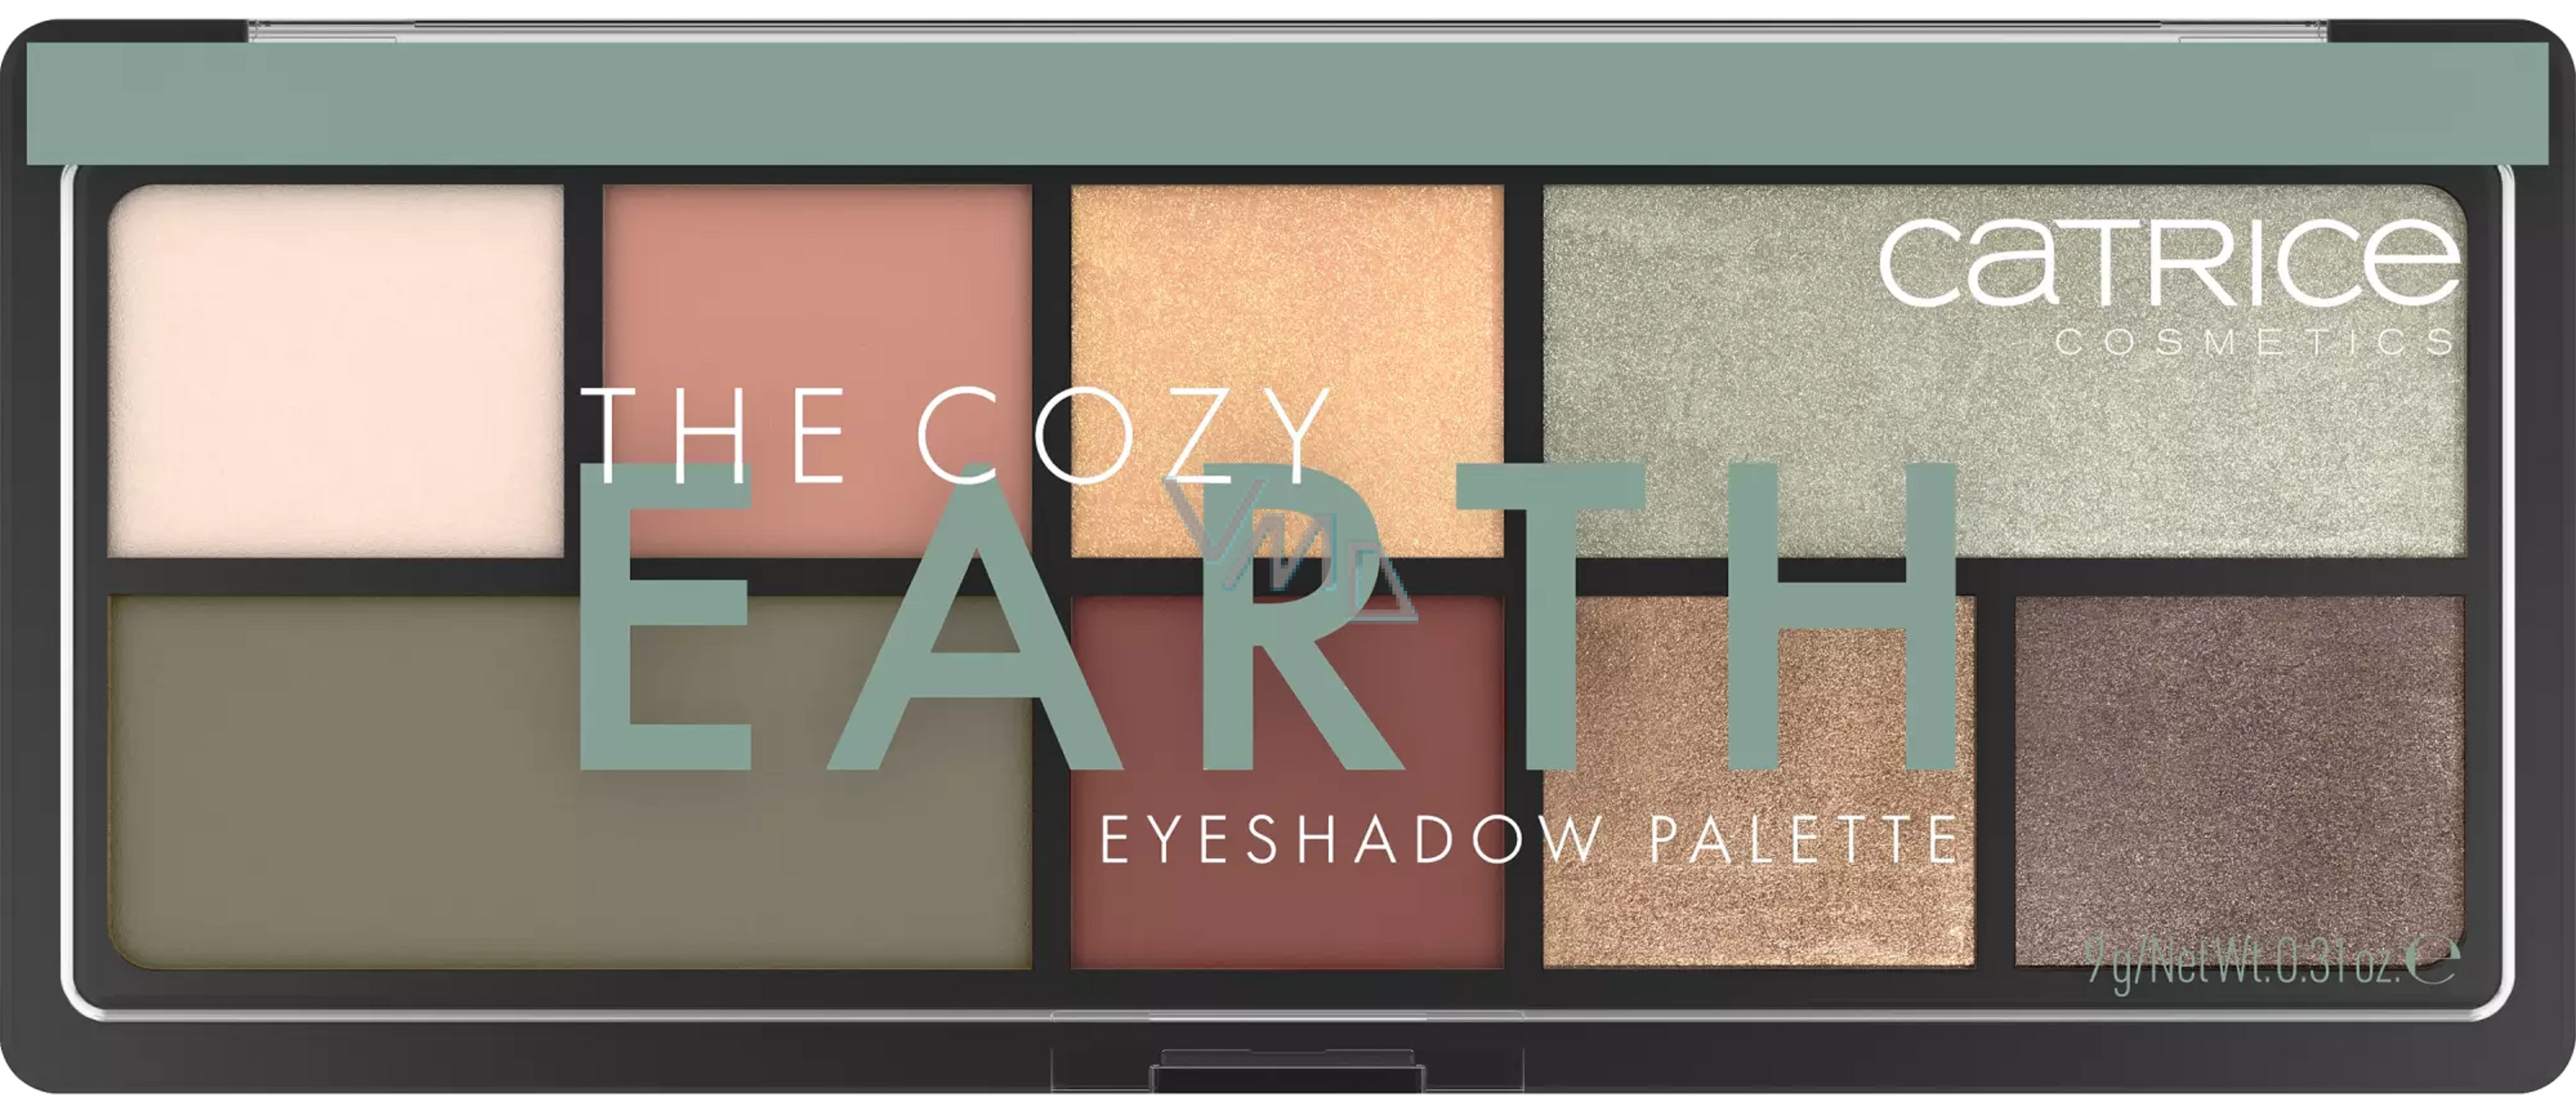 Catrice The Cozy Earth 9 parfumerie Palette - g VMD drogerie - Eyeshadow